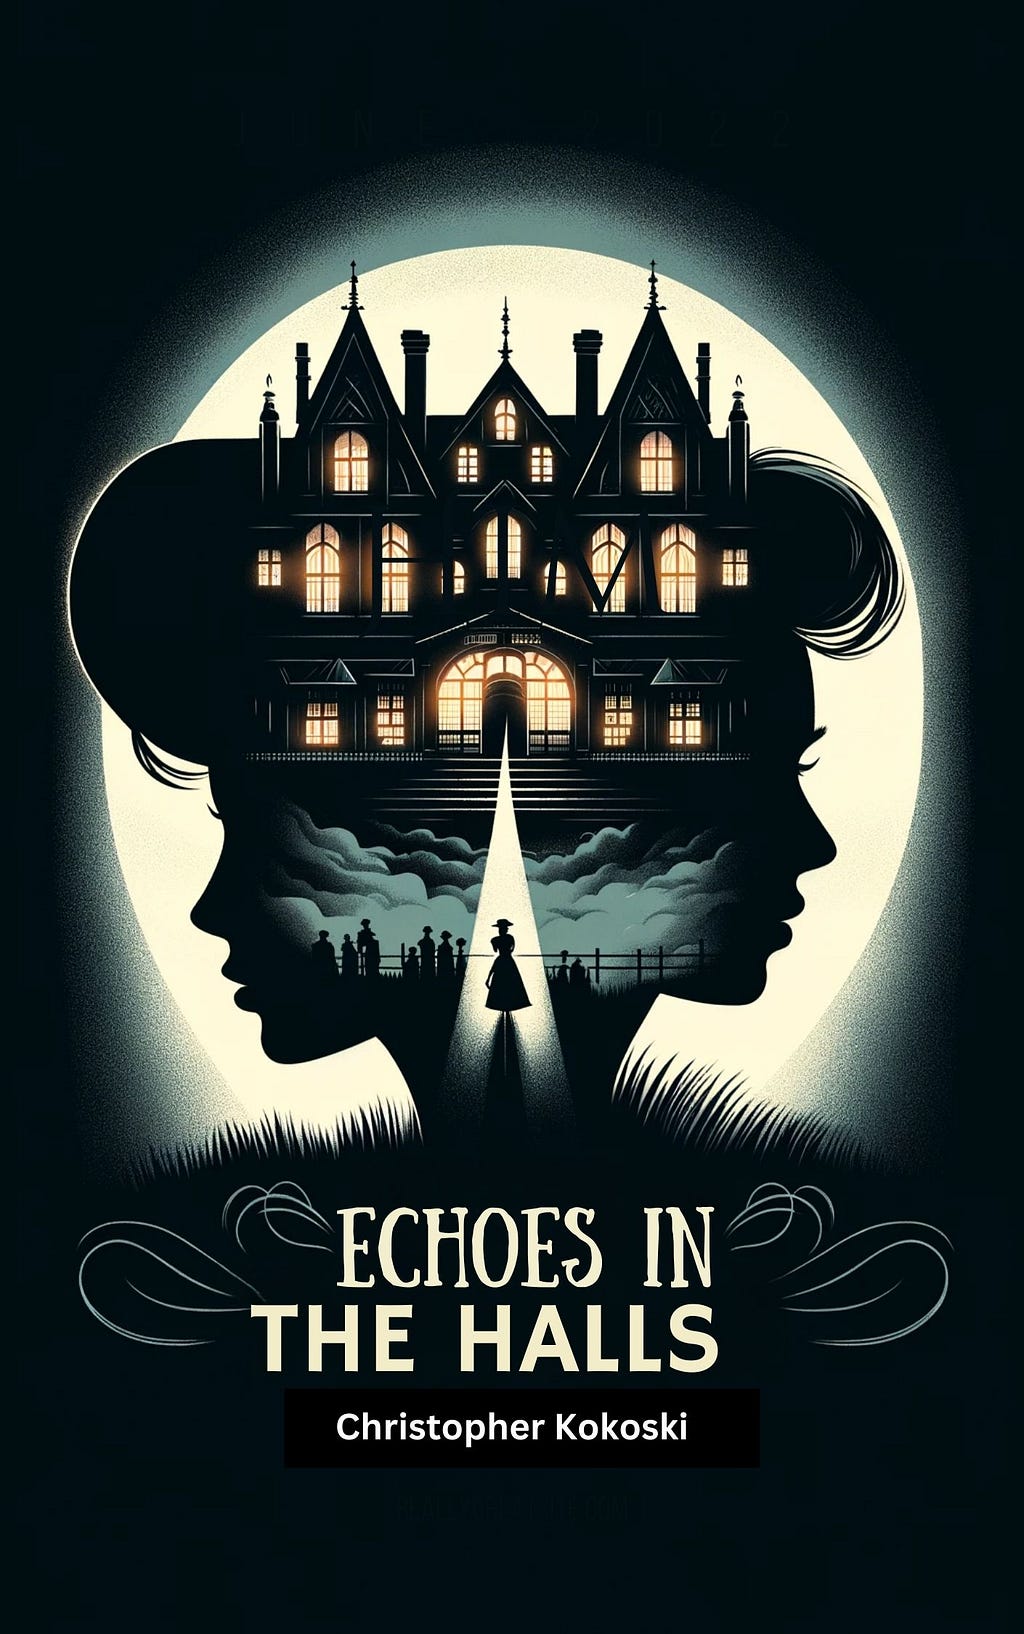 Book cover image for Echoes In The Halls — made by Christopher Kokoski using DALLE and Canva